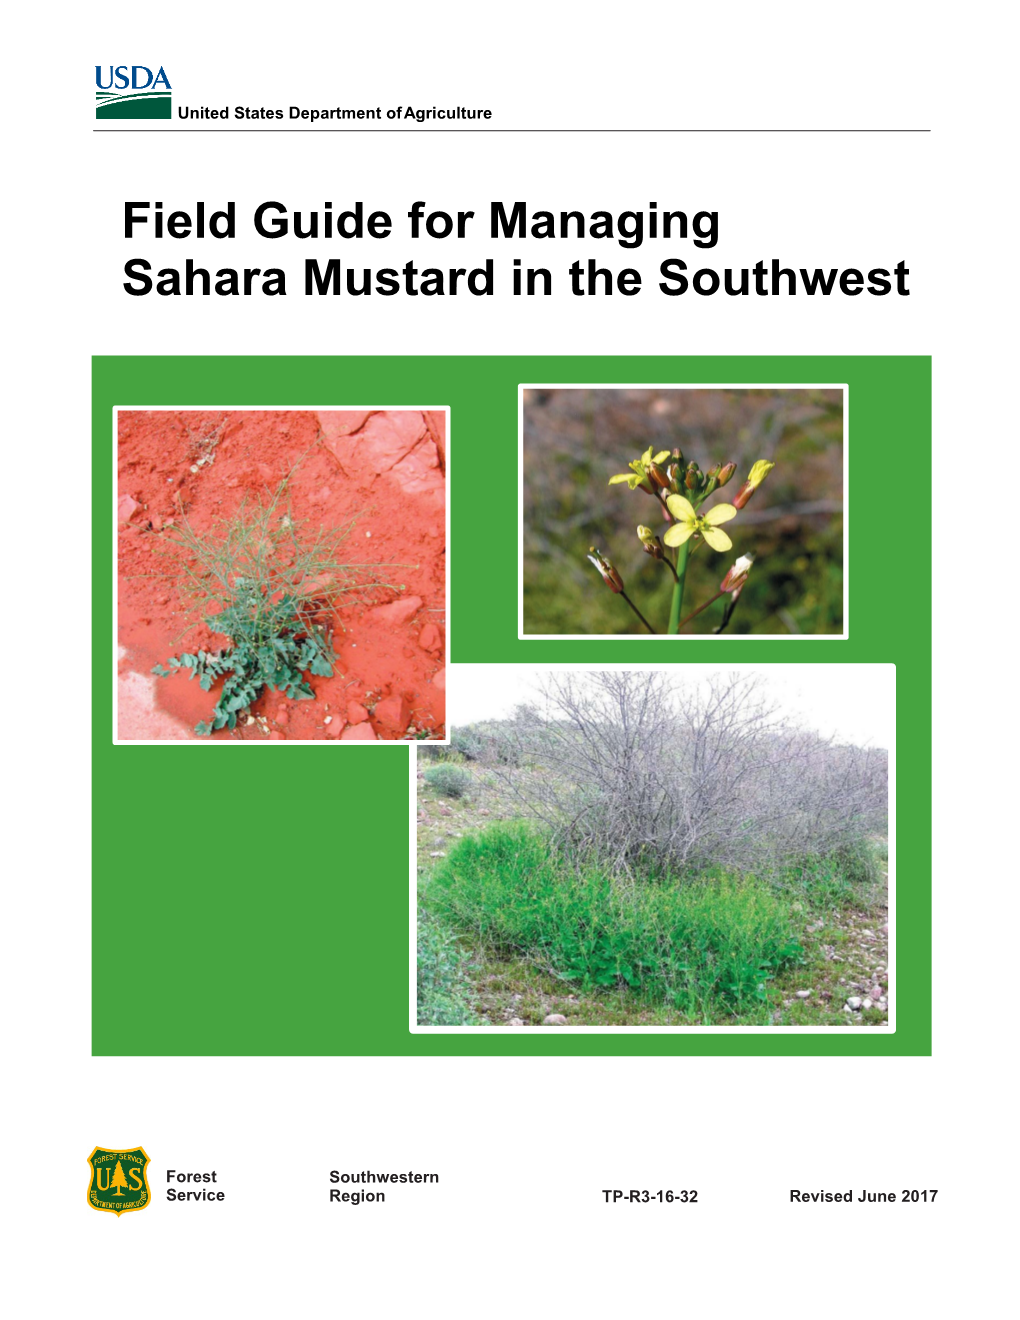 Field Guide for Managing Sahara Mustard in the Southwest